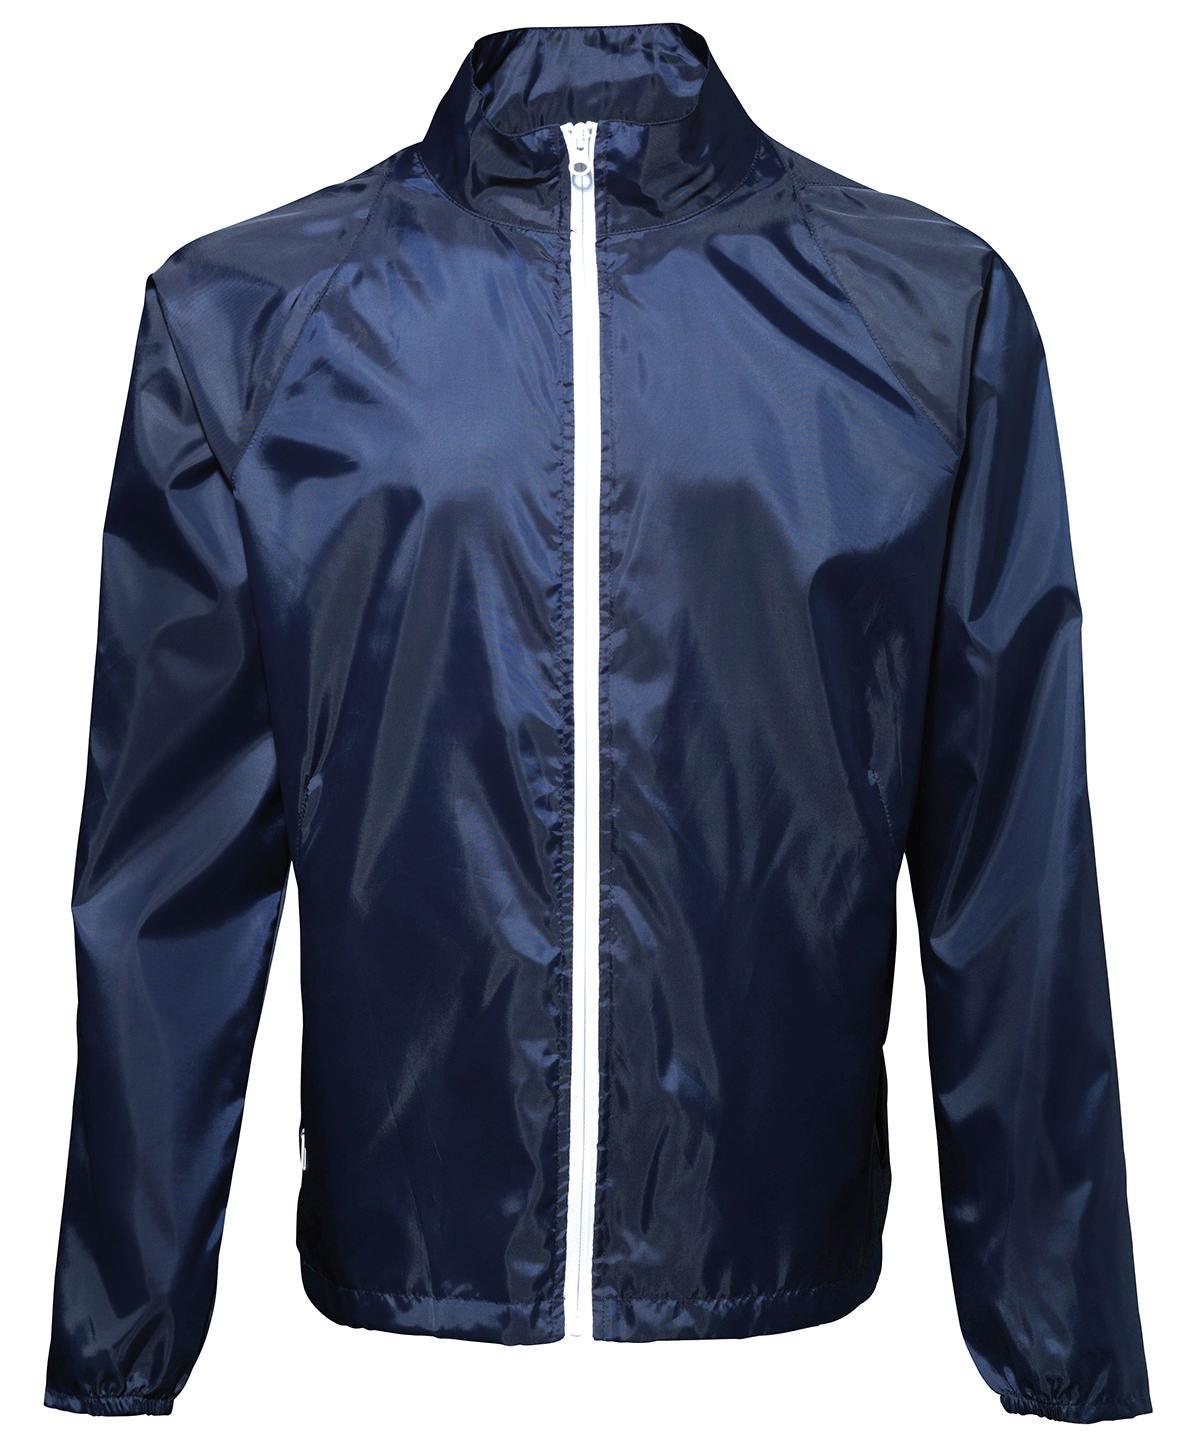 Navy/White - Contrast lightweight jacket Jackets 2786 Alfresco Dining, Camo, Jackets & Coats, Lightweight layers, Rebrandable, S/S 19 Trend Colours Schoolwear Centres